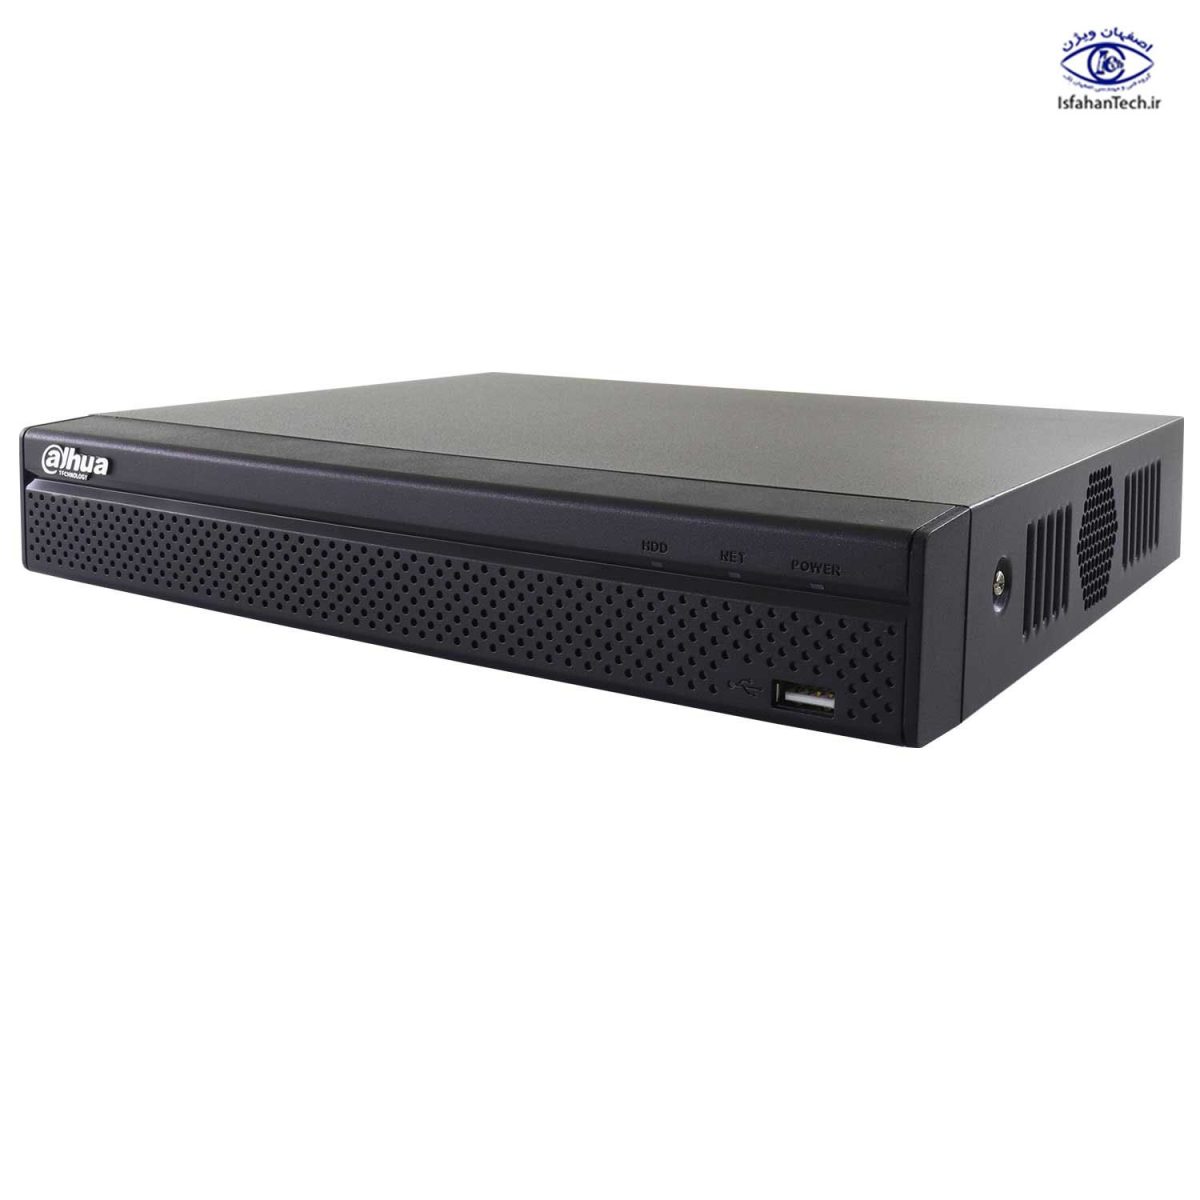 NVR4108HS-4KS2/L 8 Channel Compact 1U 1HDD Network Video Recorder